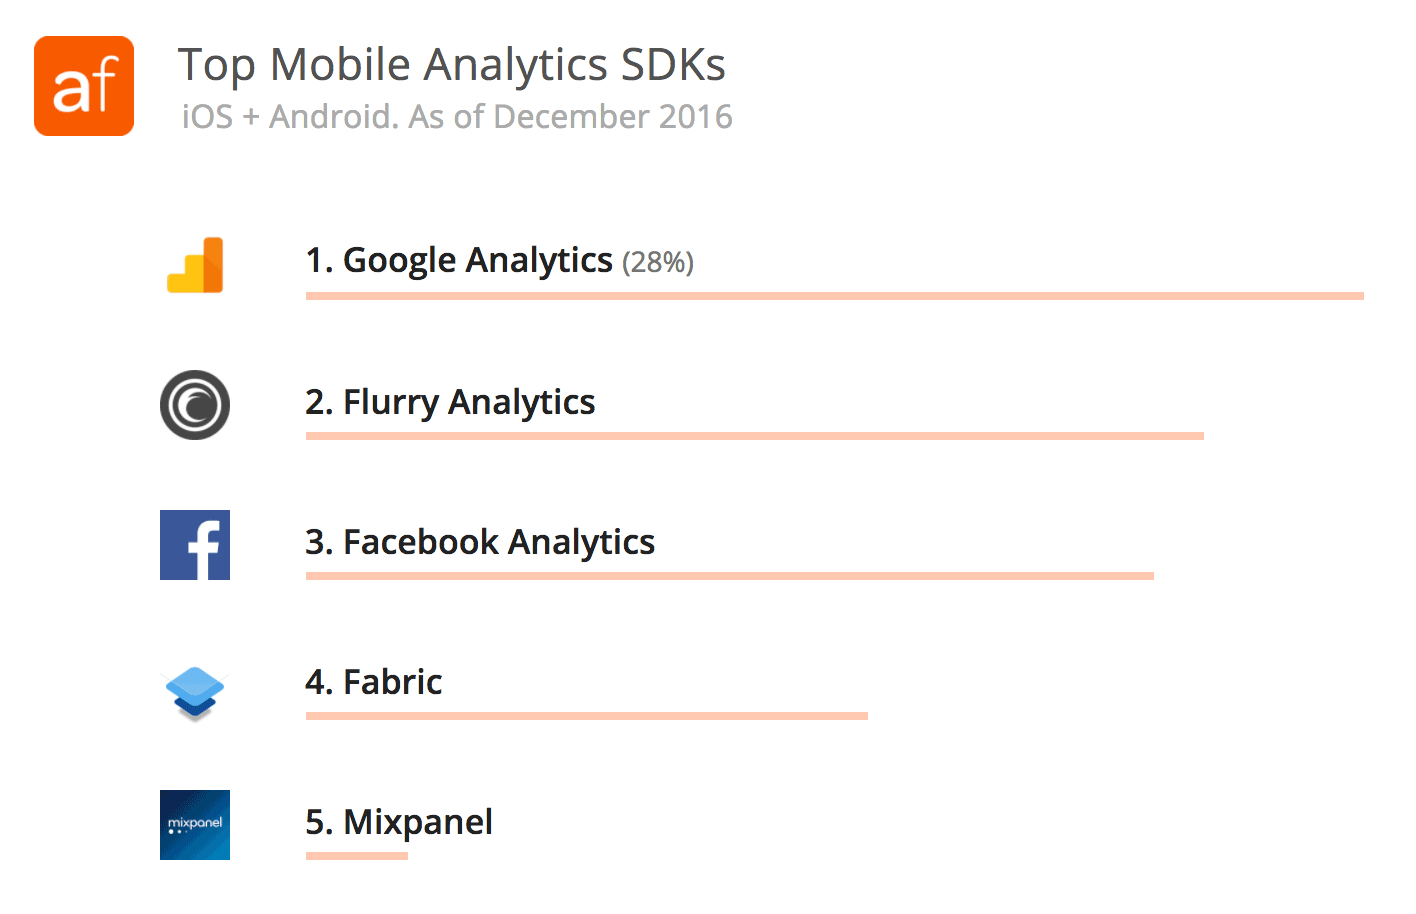 Top Mobile Analytics SDKs - iOS and Android